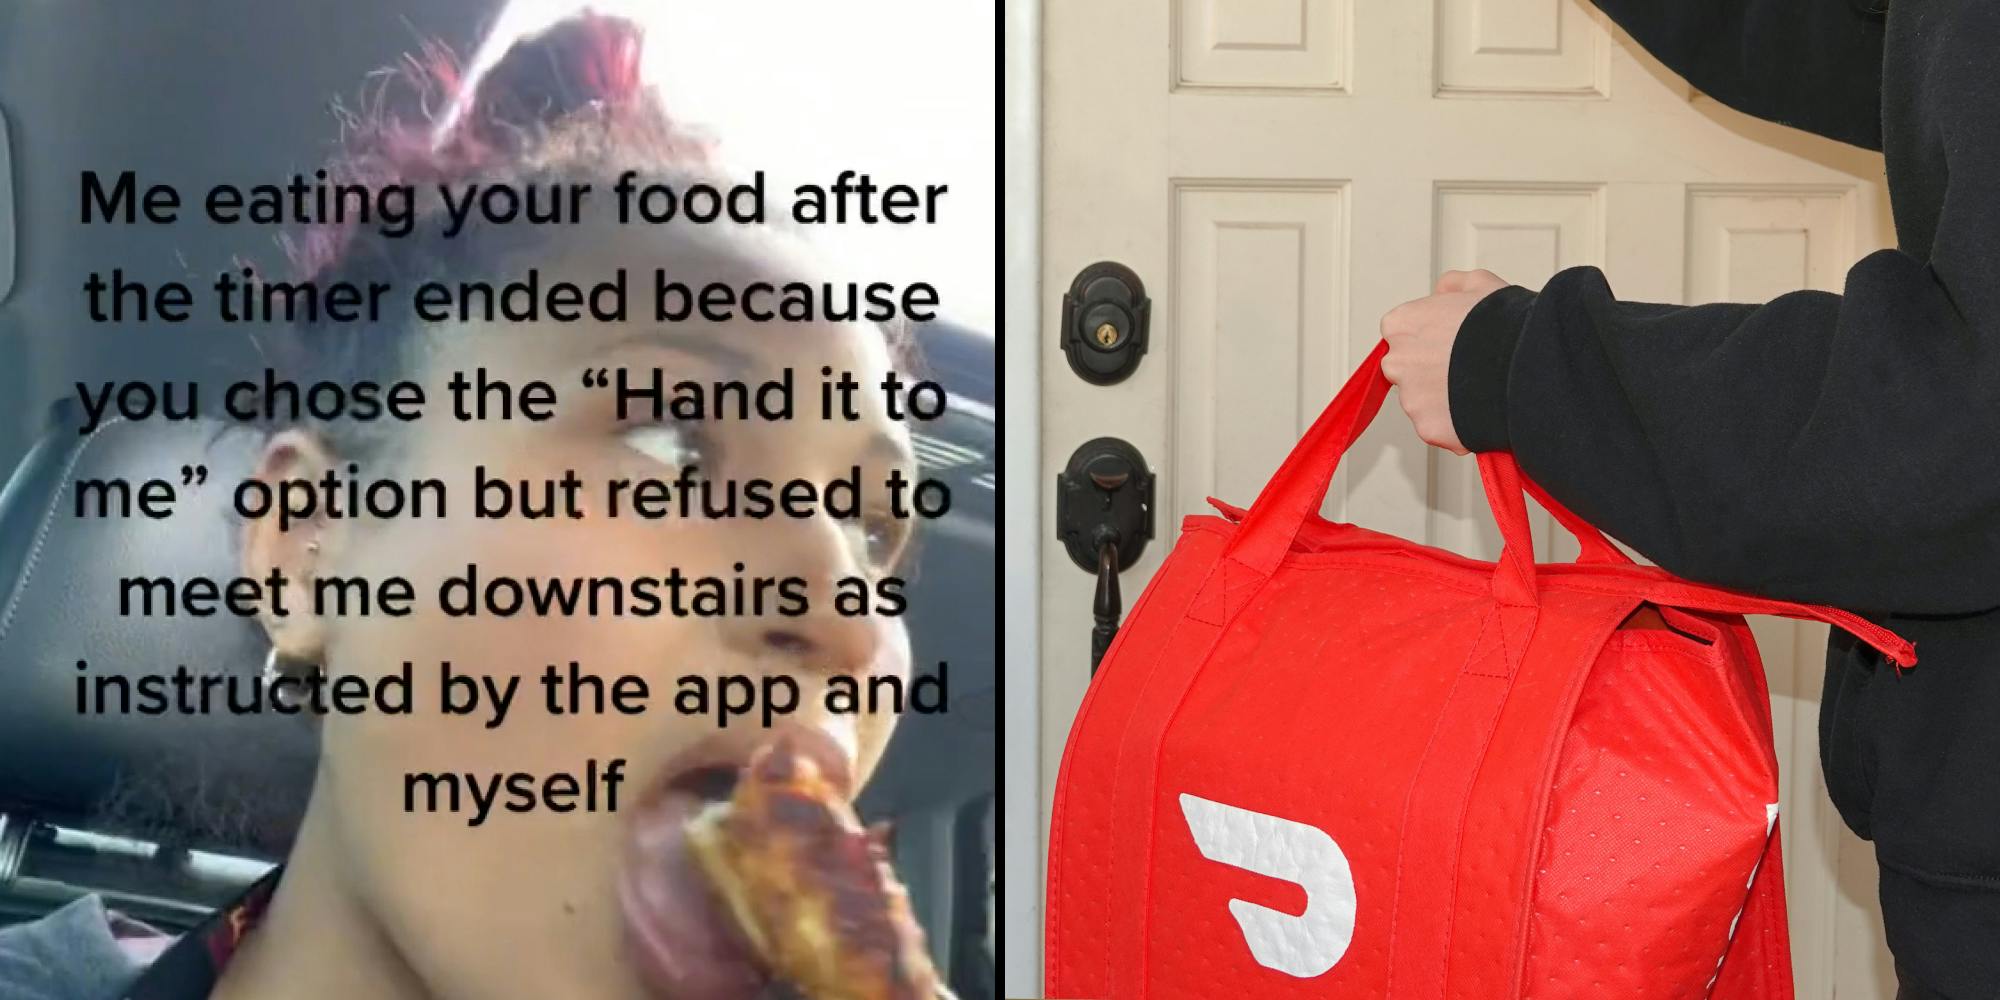 Doordash driver eating food caption "Me eating your food after timer ended because you chose the "Hand it to me" option but refused to meet me downstairs as instructed by the app and myself" (l) Doordash delivery person holding bag knocking on door (r)